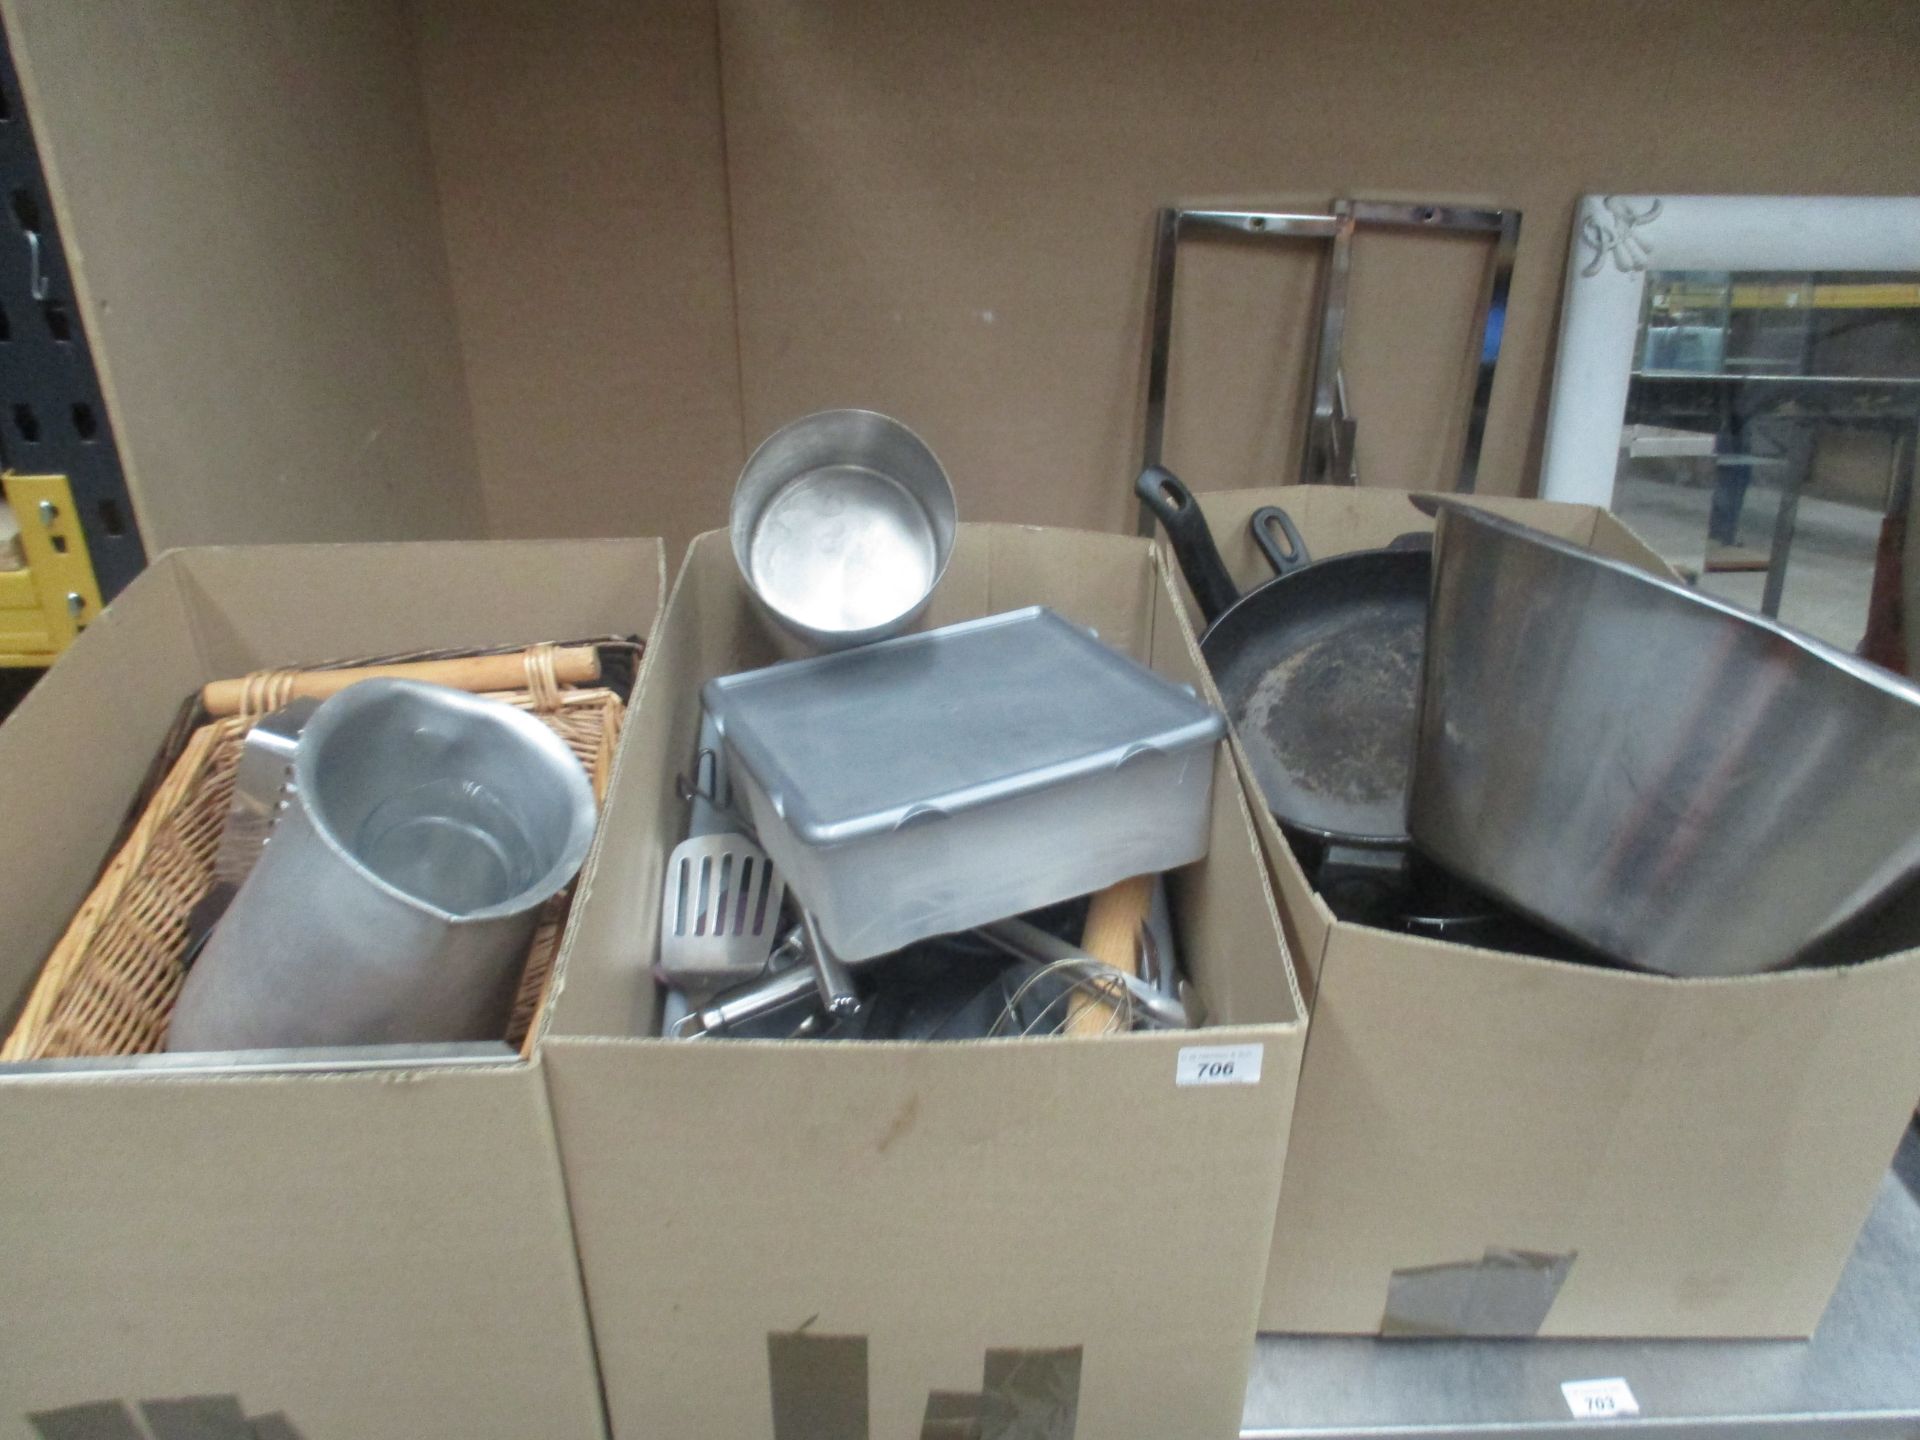 Contents to three boxes - stainless steel bowl, Professional frying pans, chopping knives,